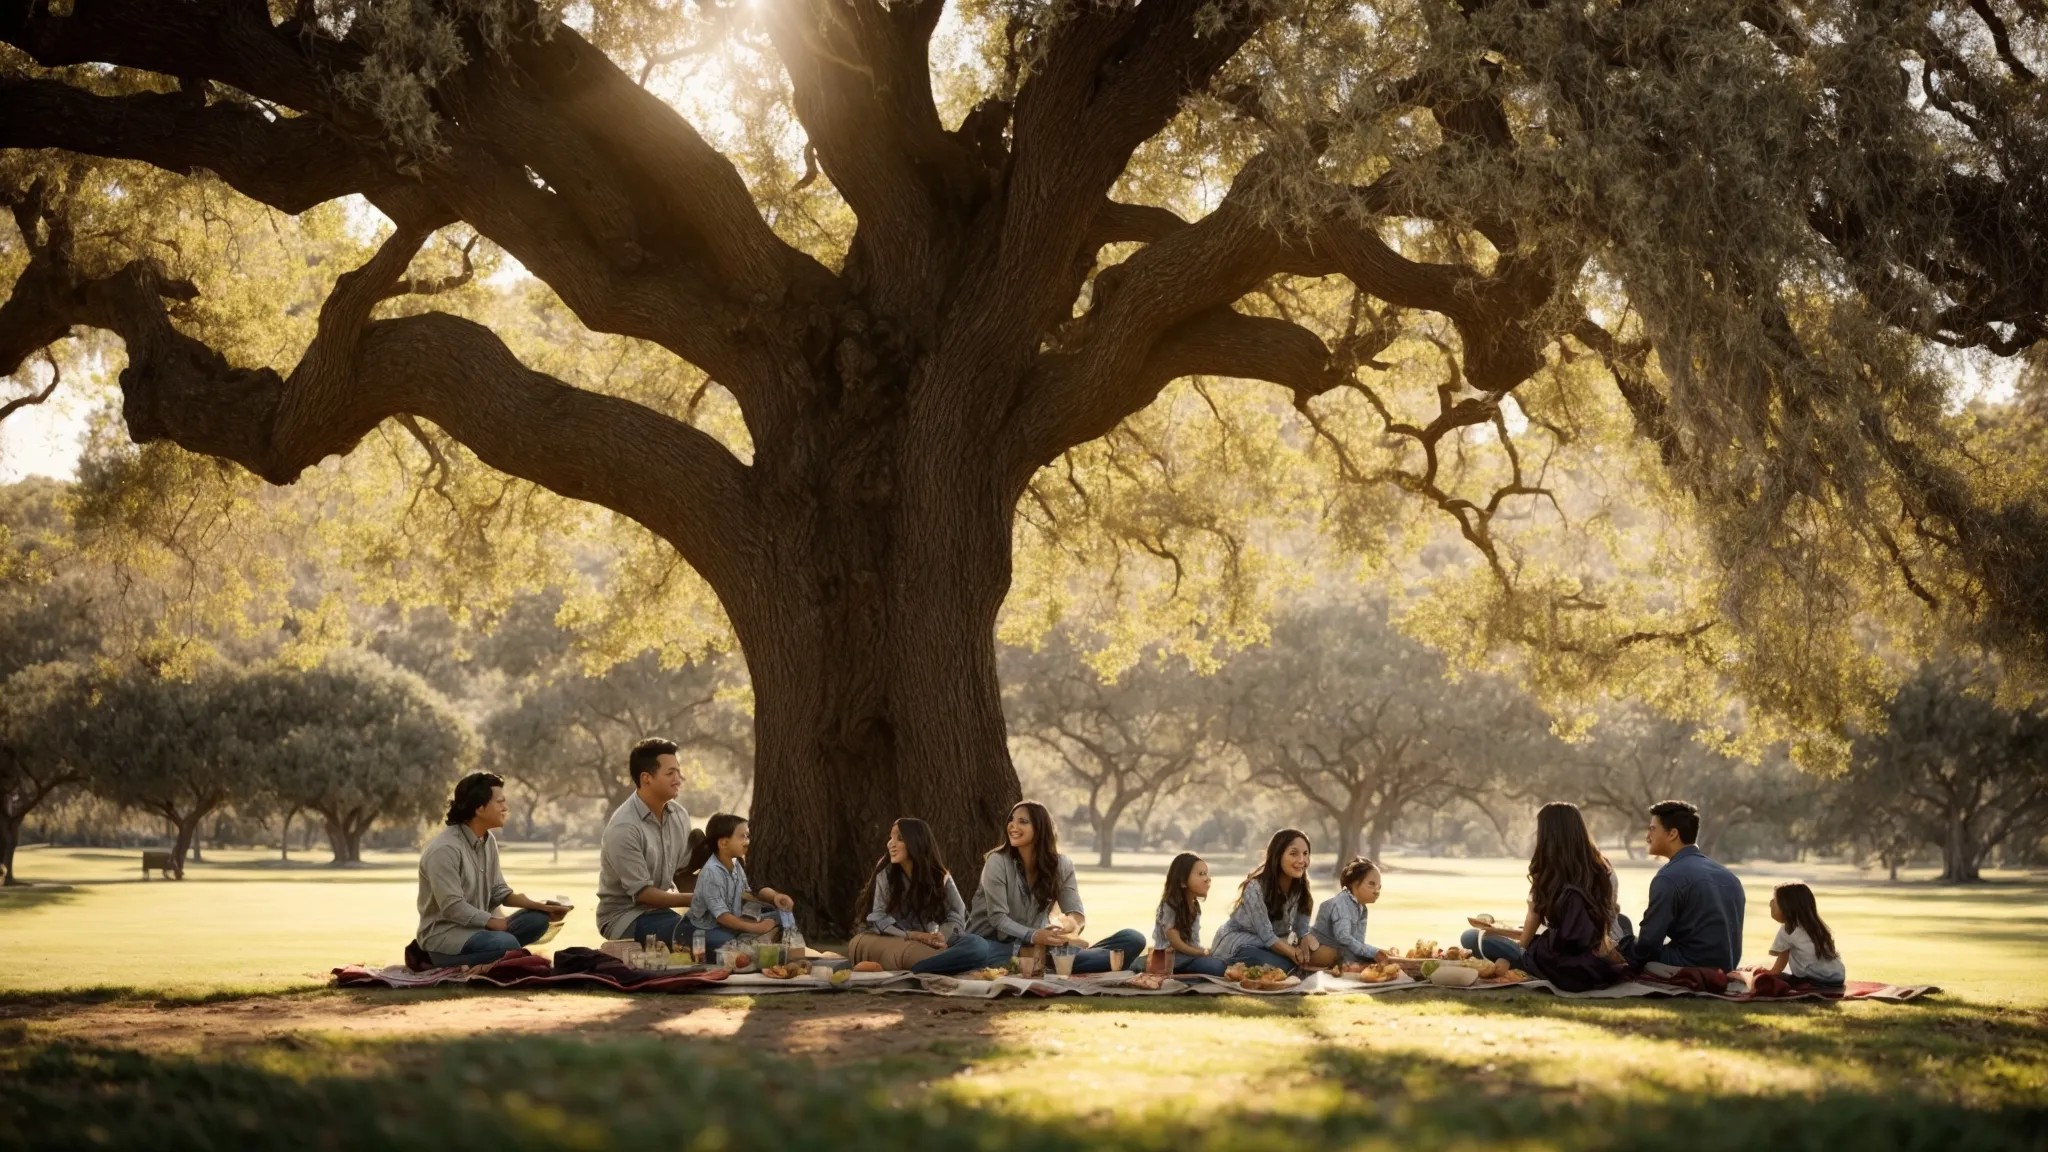 a family enjoys a picnic under the sprawling branches of a majestic oak in a sunlit san diego park.